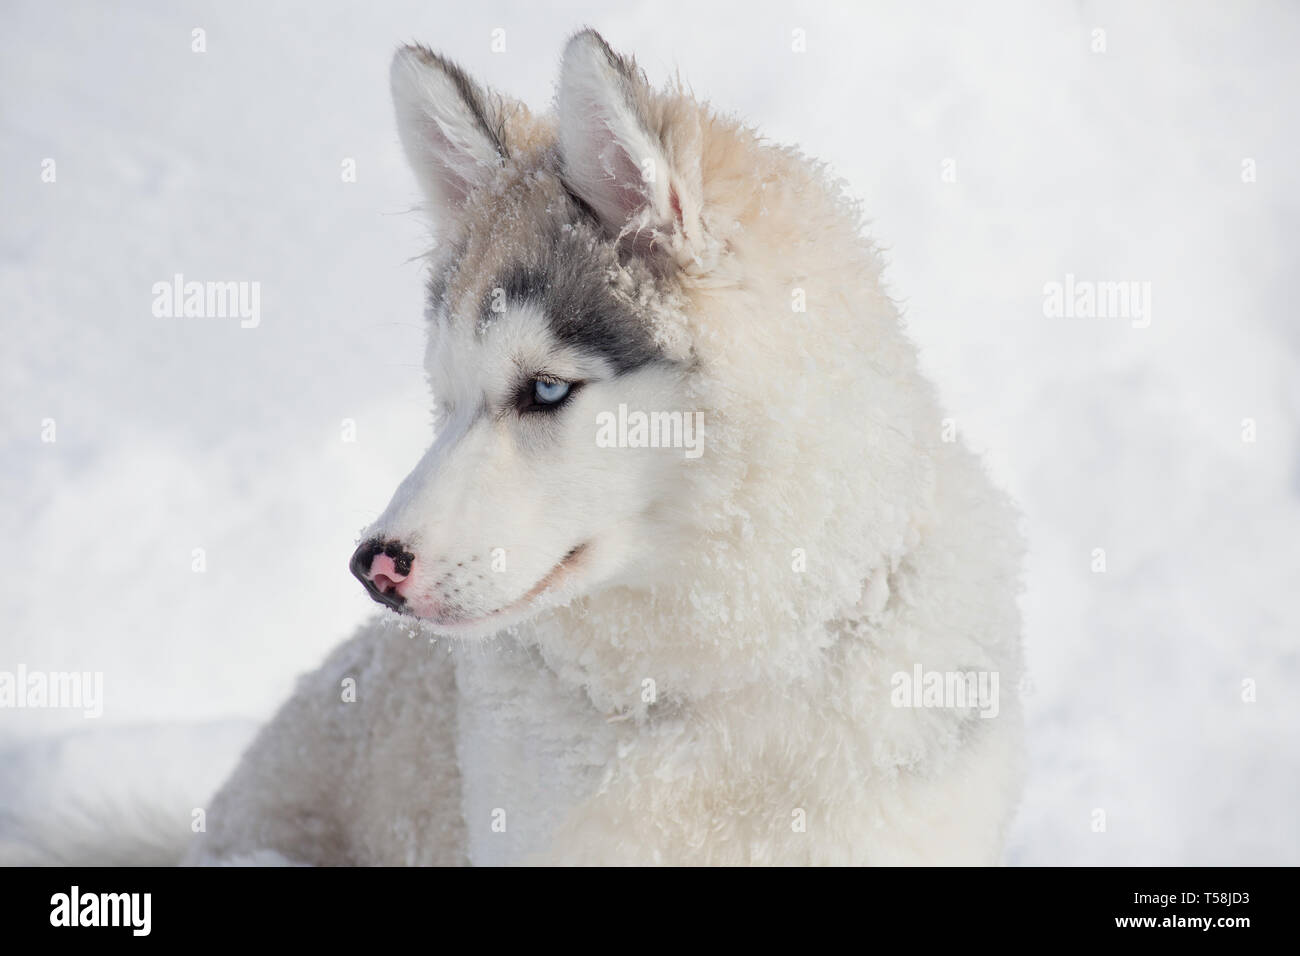 Cute Siberian Husky Puppy Is Sitting On A White Snow Three Month Old Pet Animals Purebred Dog Stock Photo Alamy